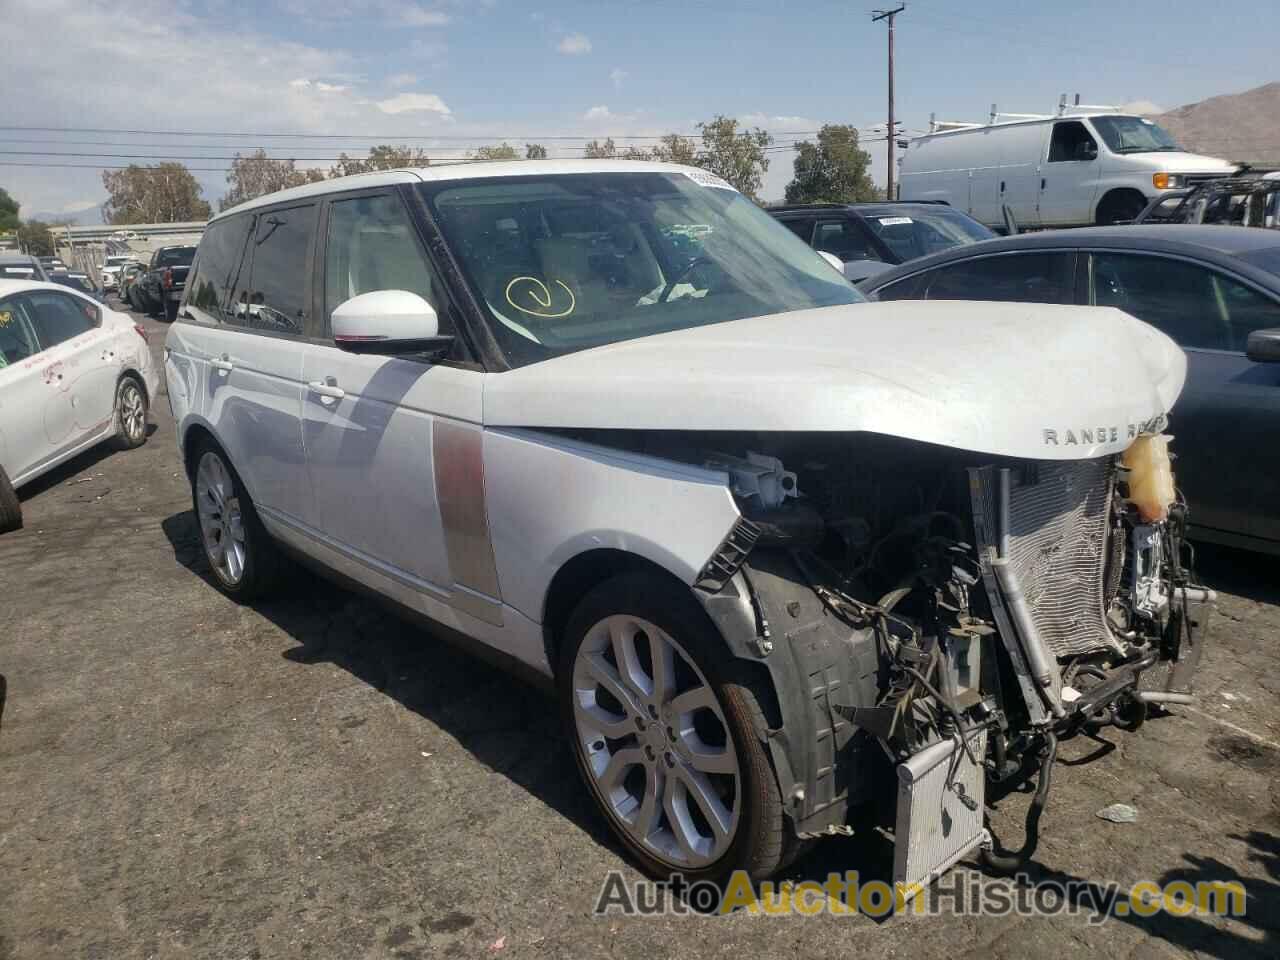 2018 LAND ROVER RANGEROVER SUPERCHARGED, SALGS2RE6JA503748